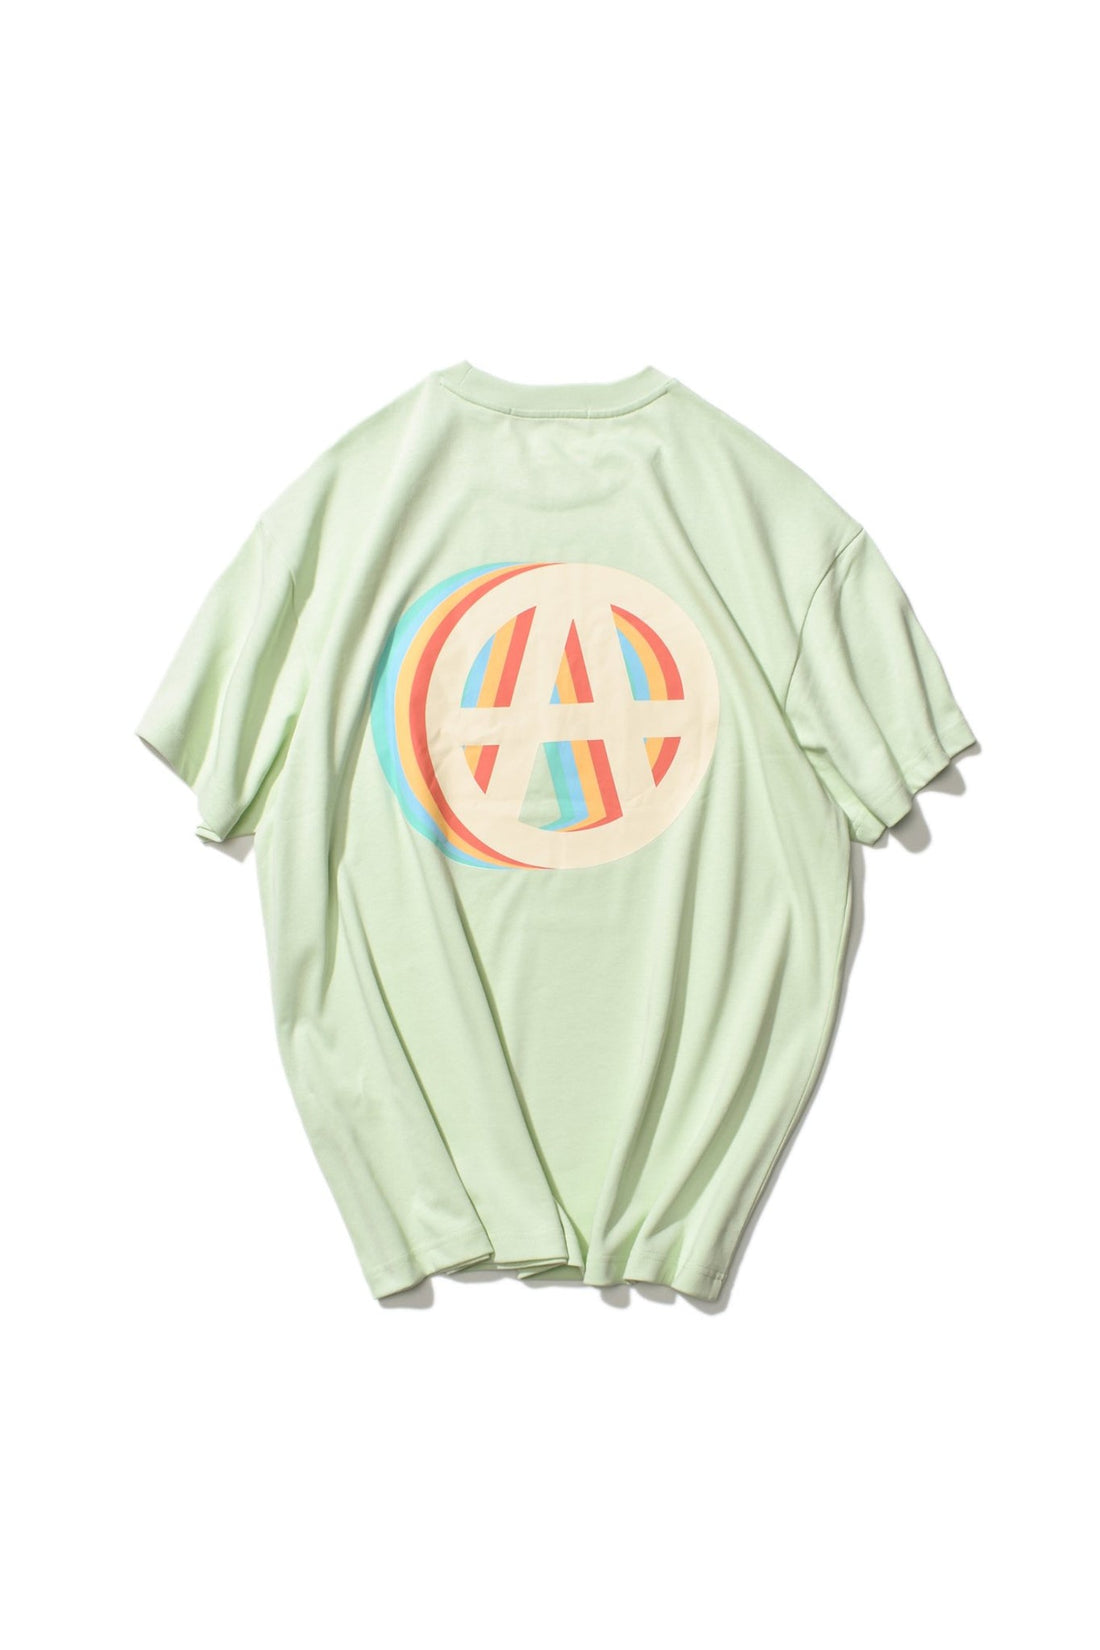 CIRCLE A T-SHIRT MINT Acupuncture